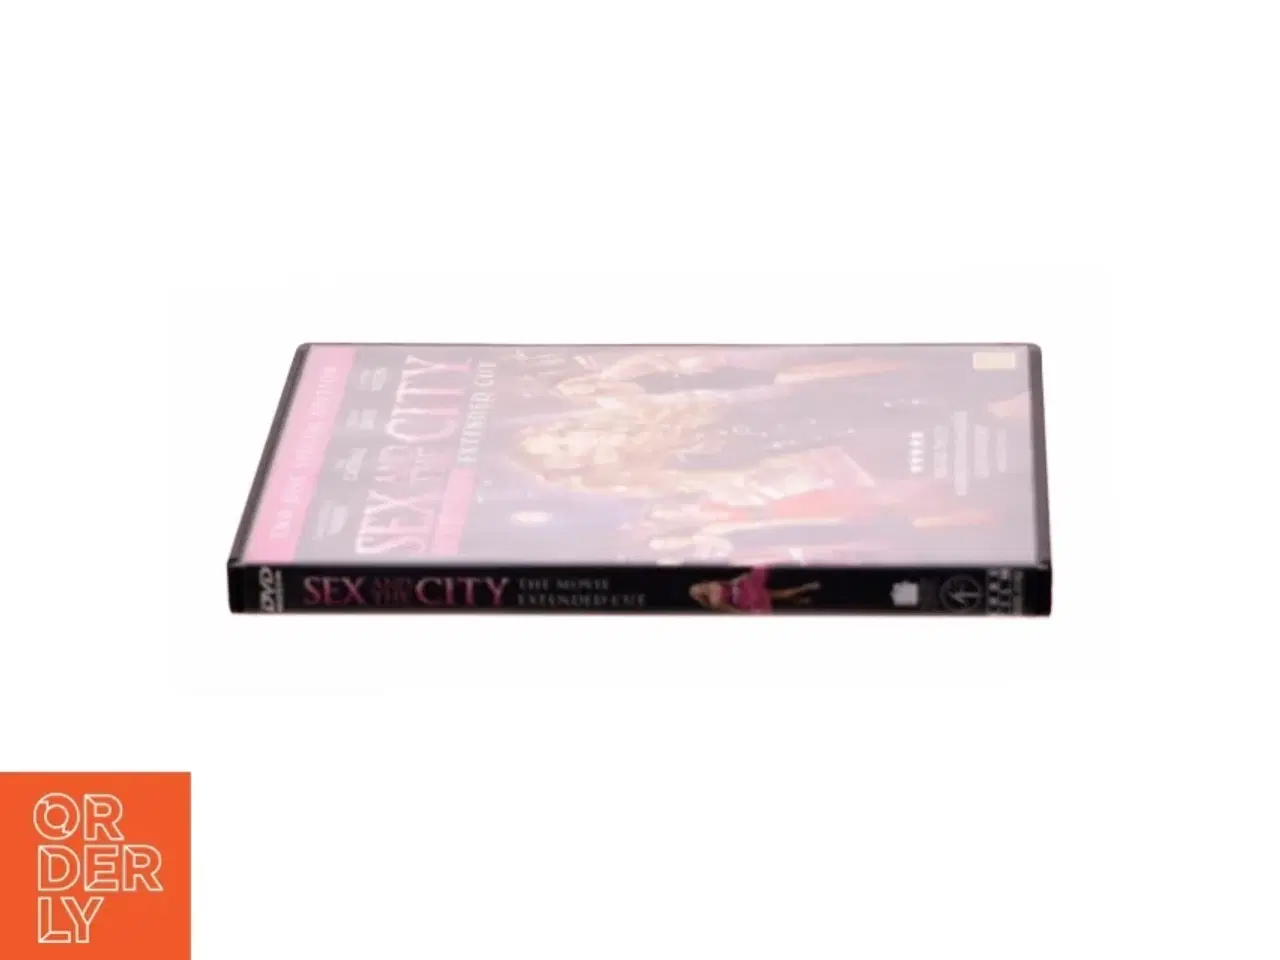 Billede 2 - Sex and the City (2disc Version)